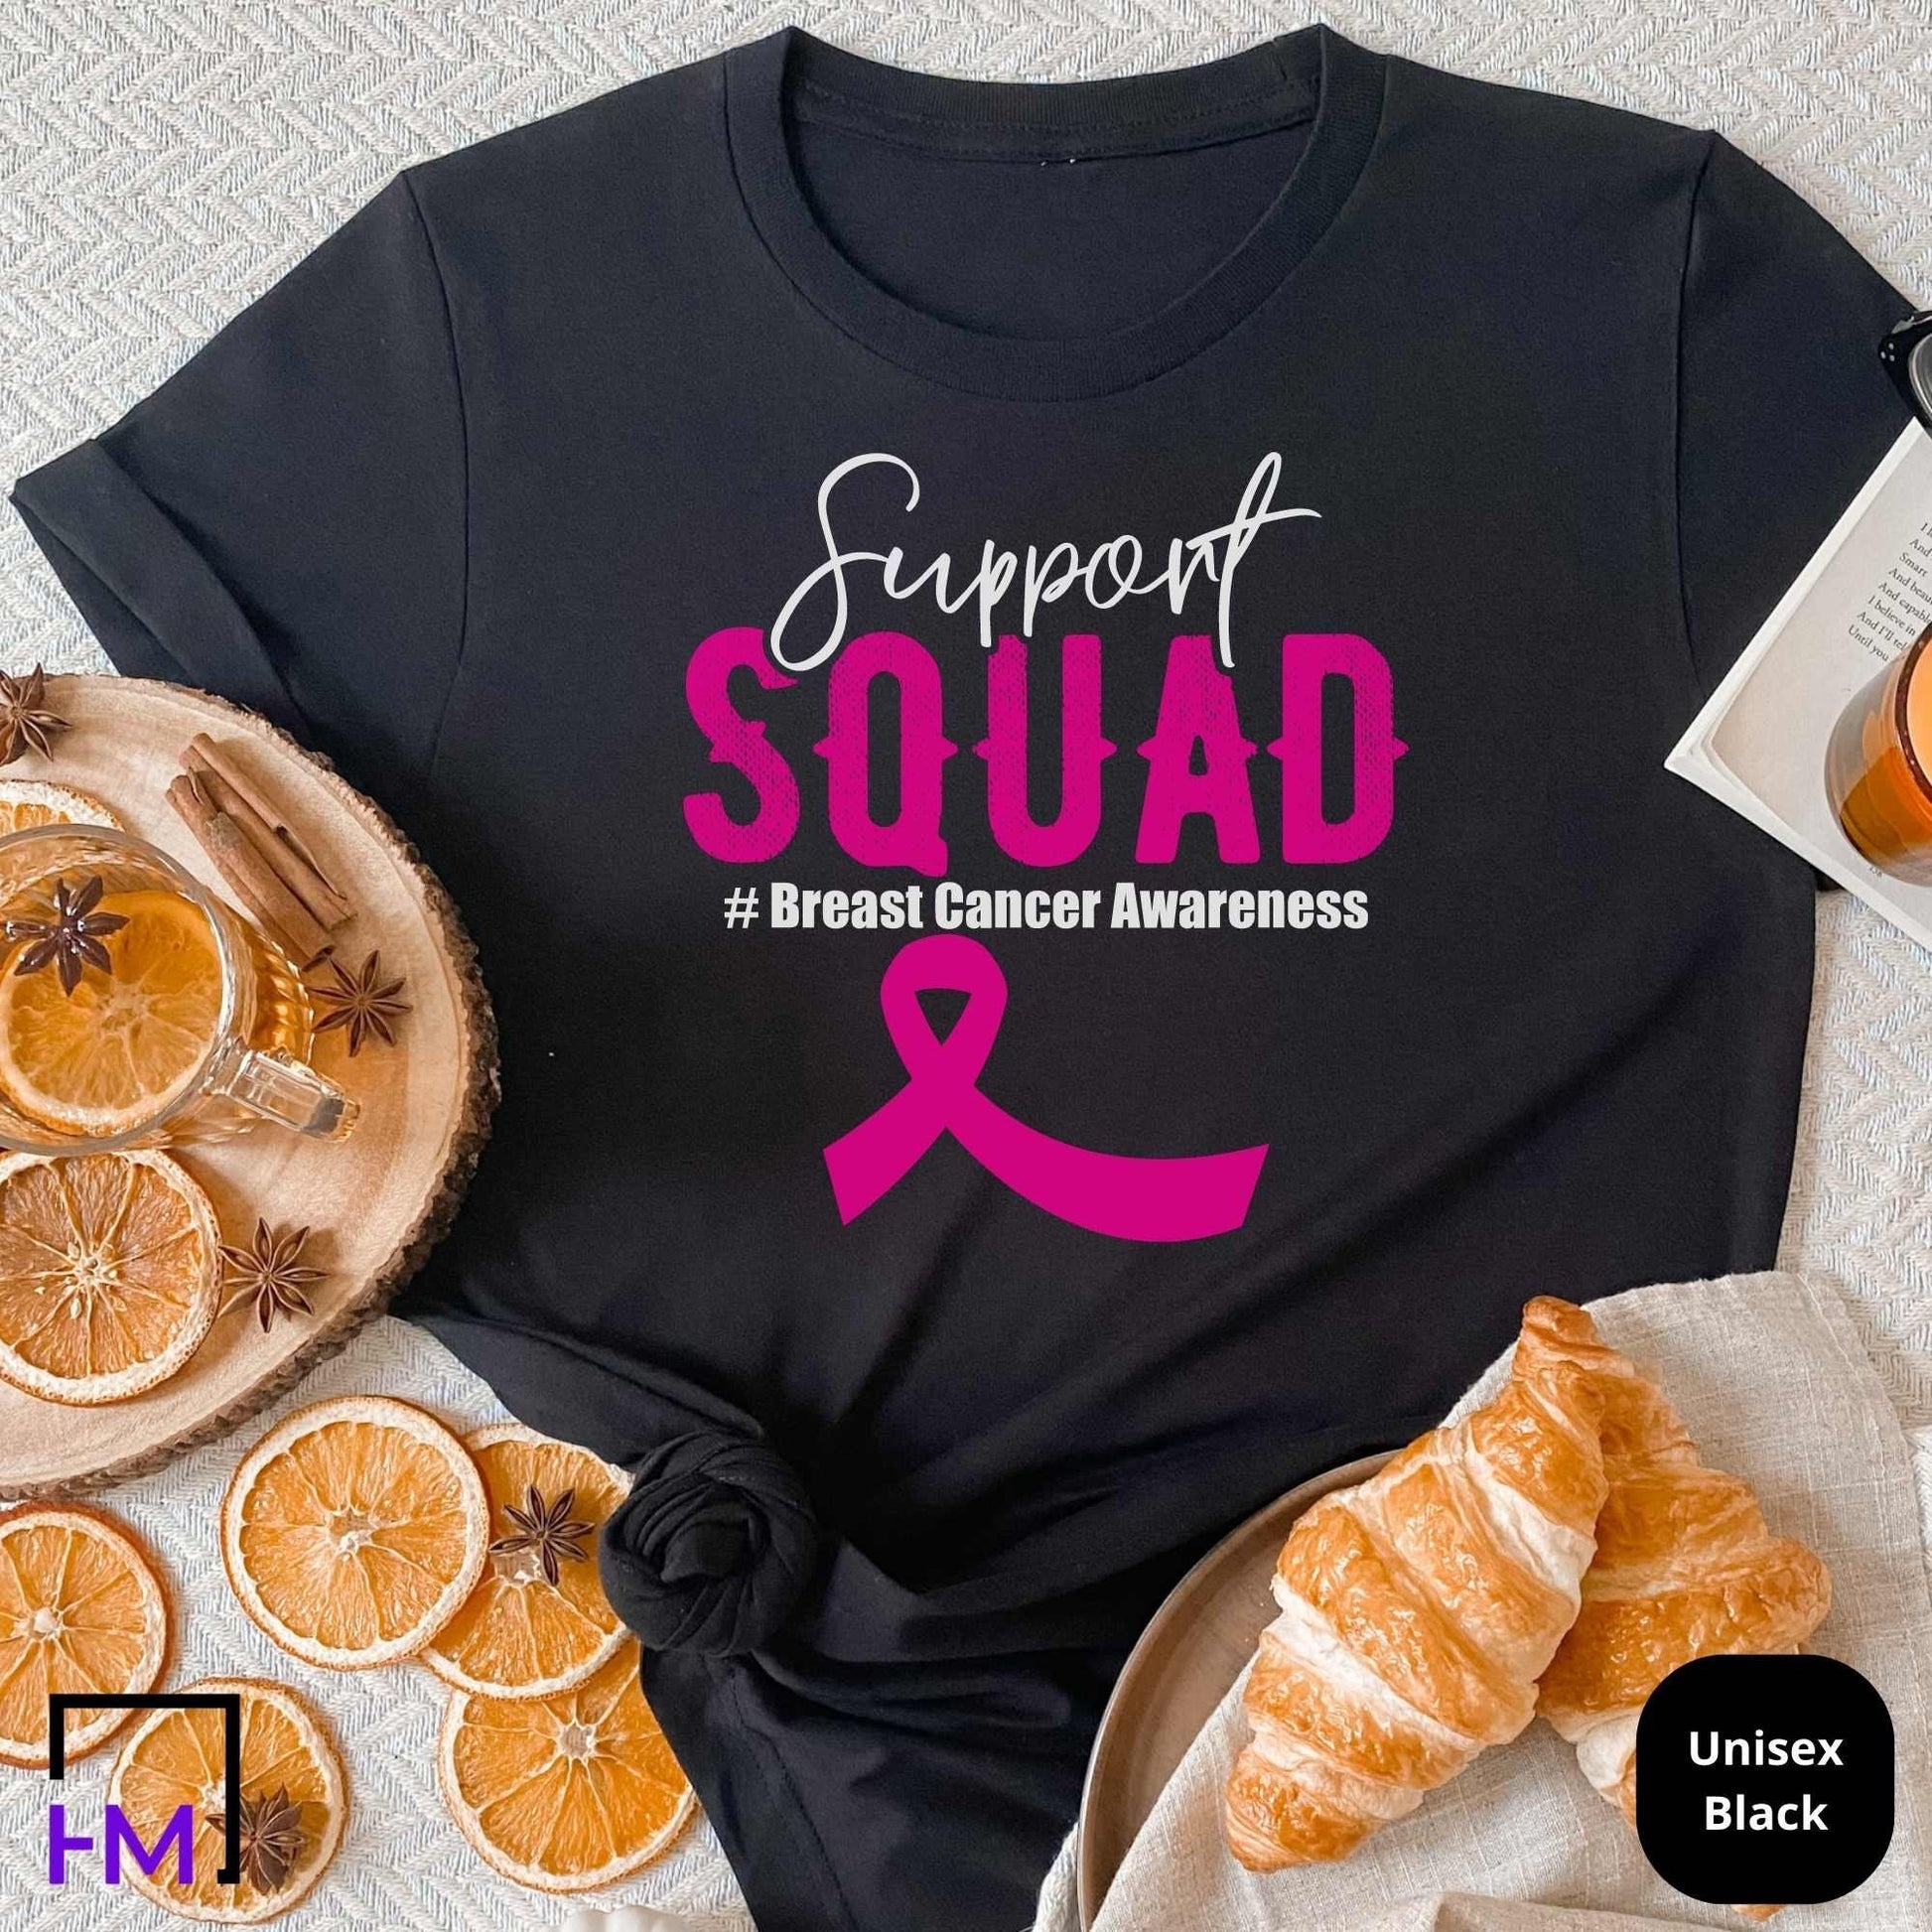 Support Squad Fight Cancer T-shirt, World Cancer Awareness Gift, Breast Cancer Ribbon, Survivor Sweater, Cancer in Every Color Sweatshirt